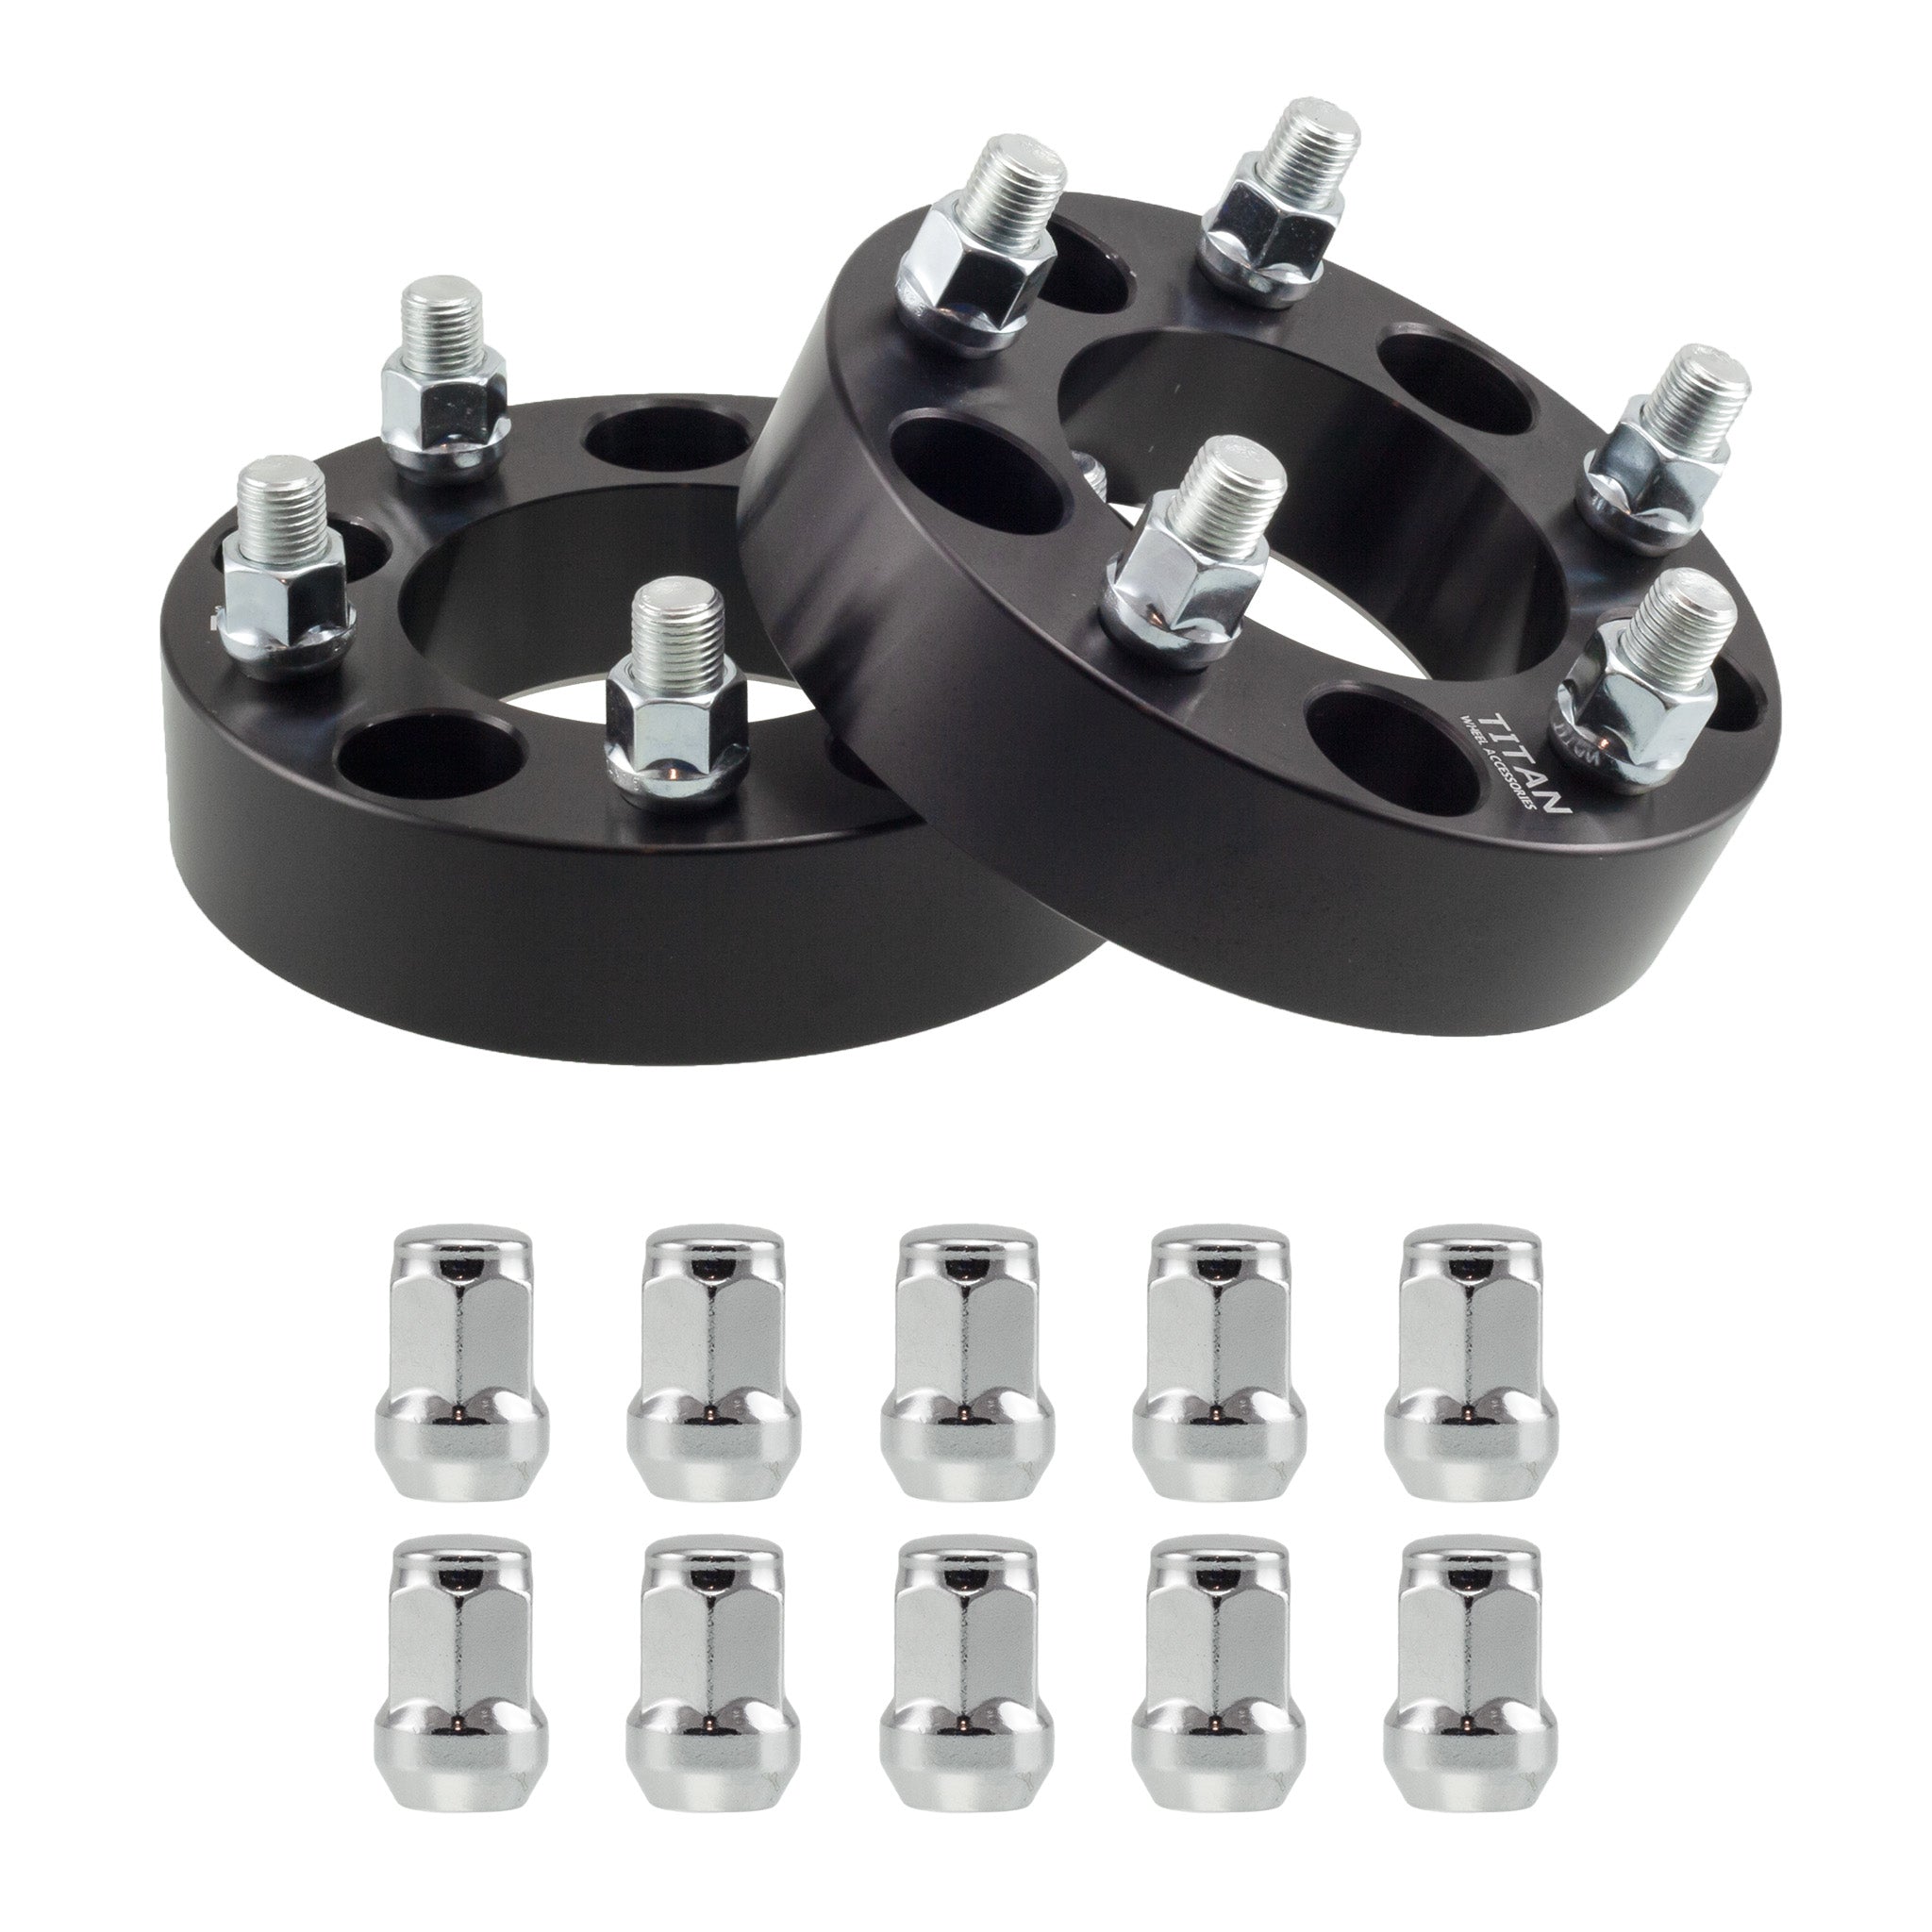 2 Inch Hubcentric Wheel Spacers for Dodge Ram 1500 | 5x5.5 (5x139